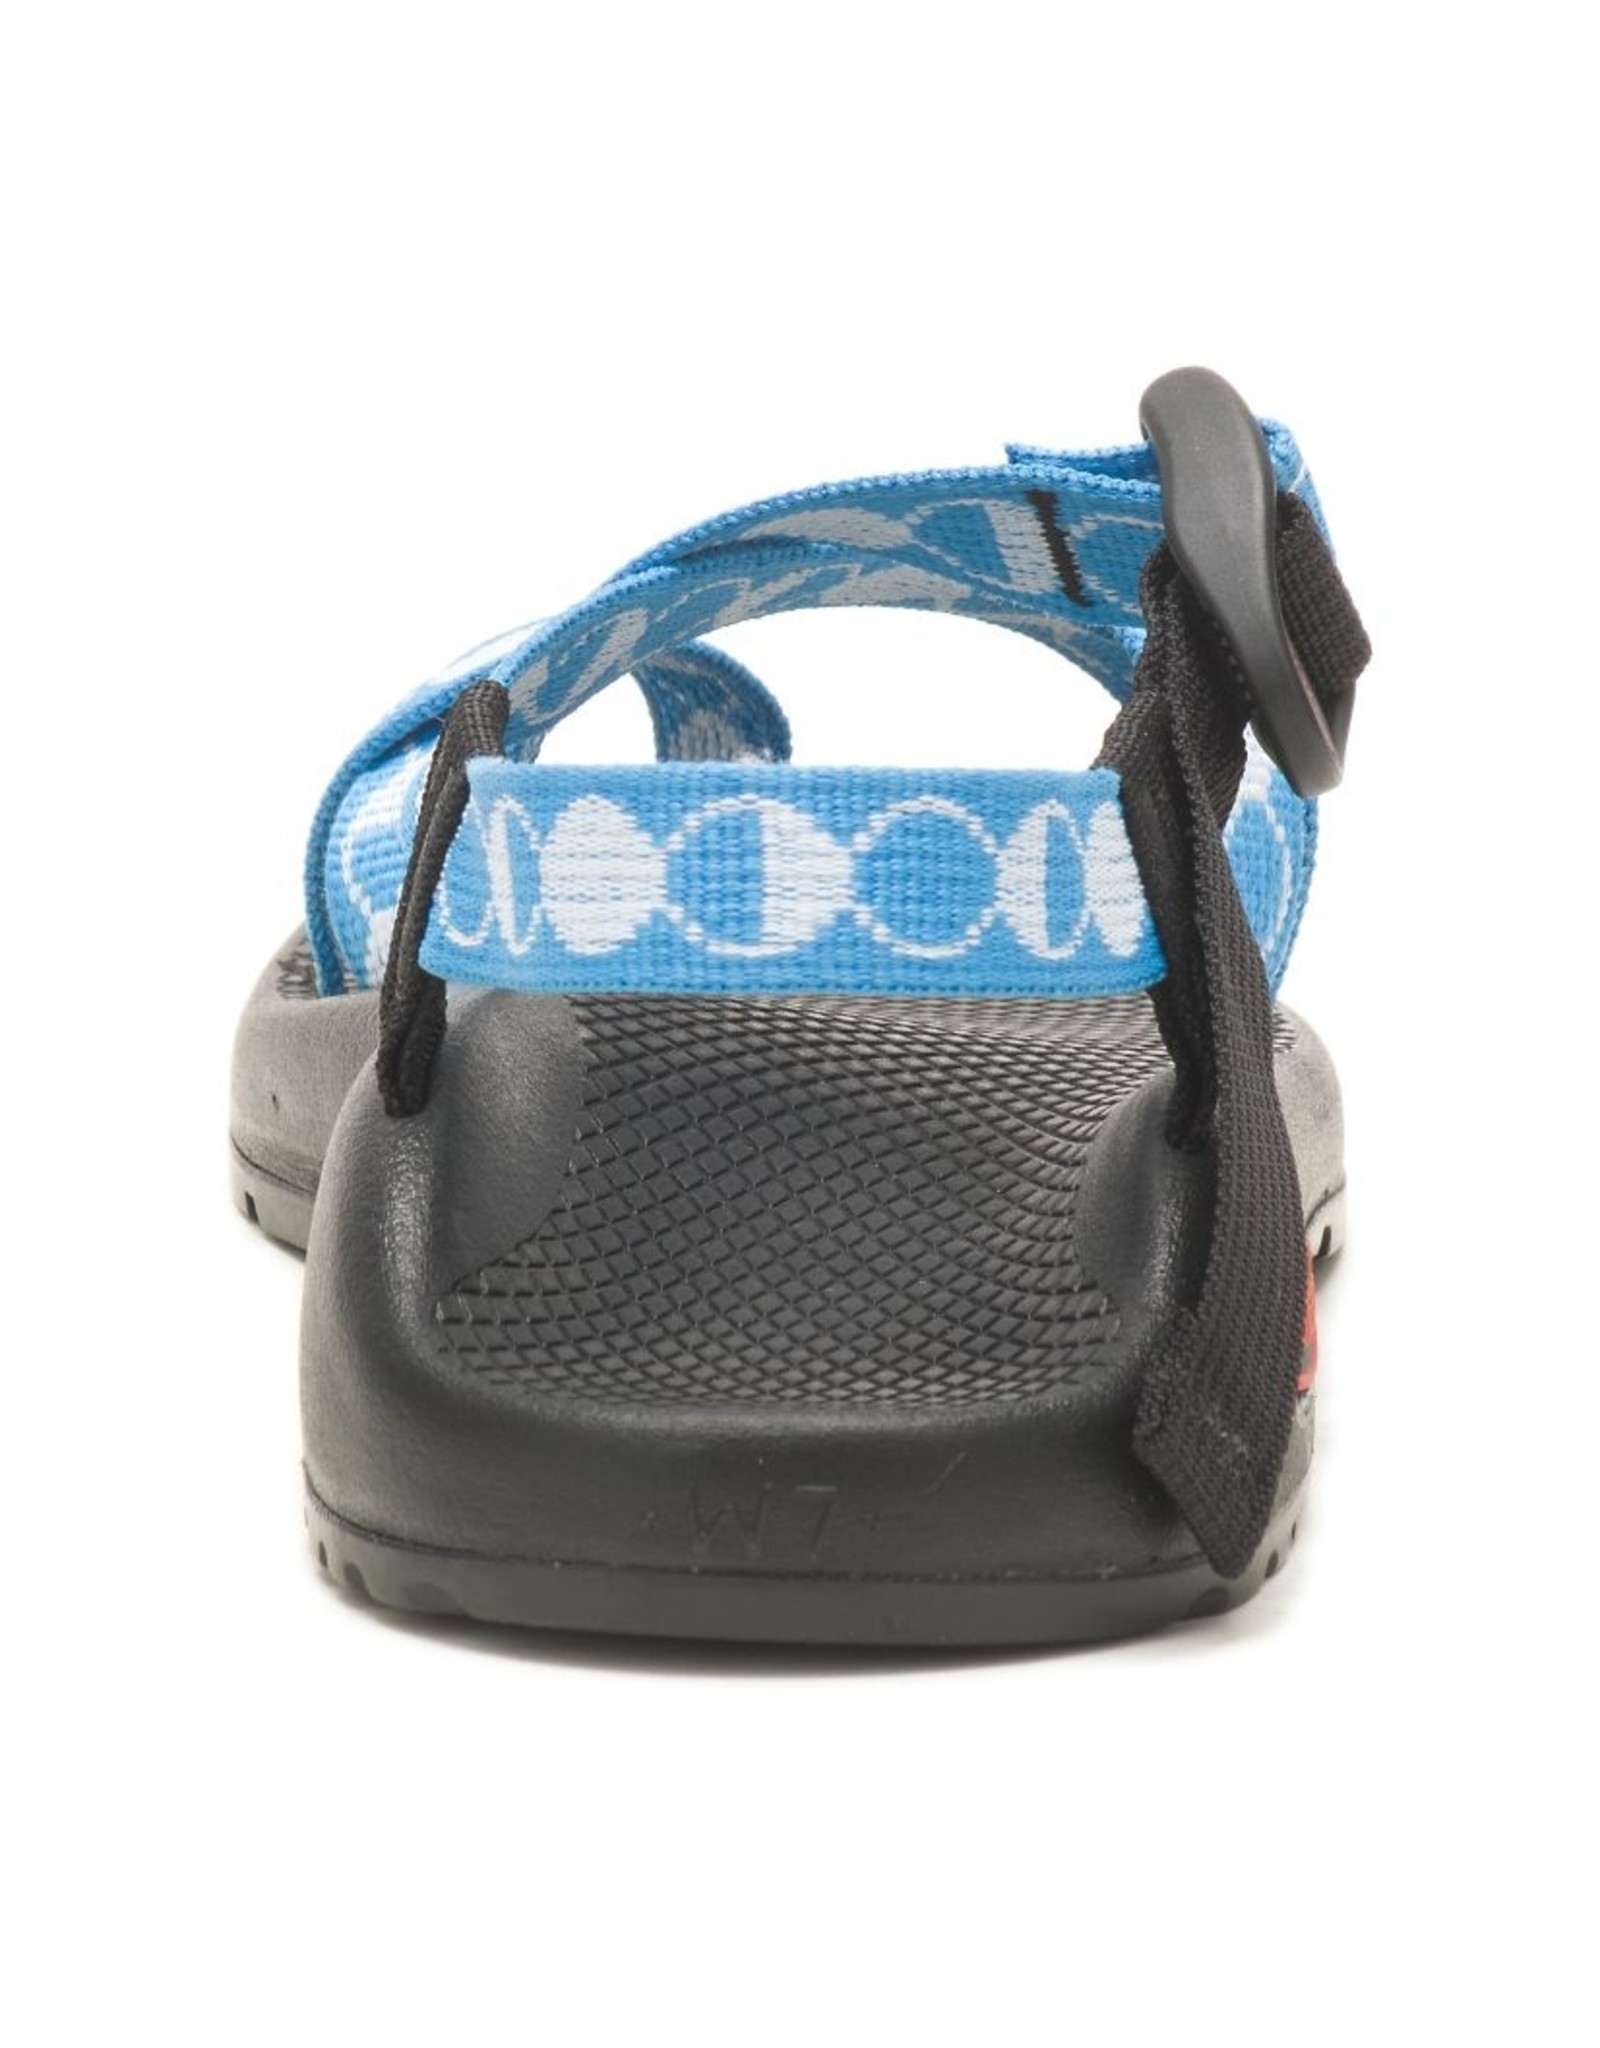 CHACO WOMEN'S Z/2 CLASSIC-PHASE AZURE BLUE